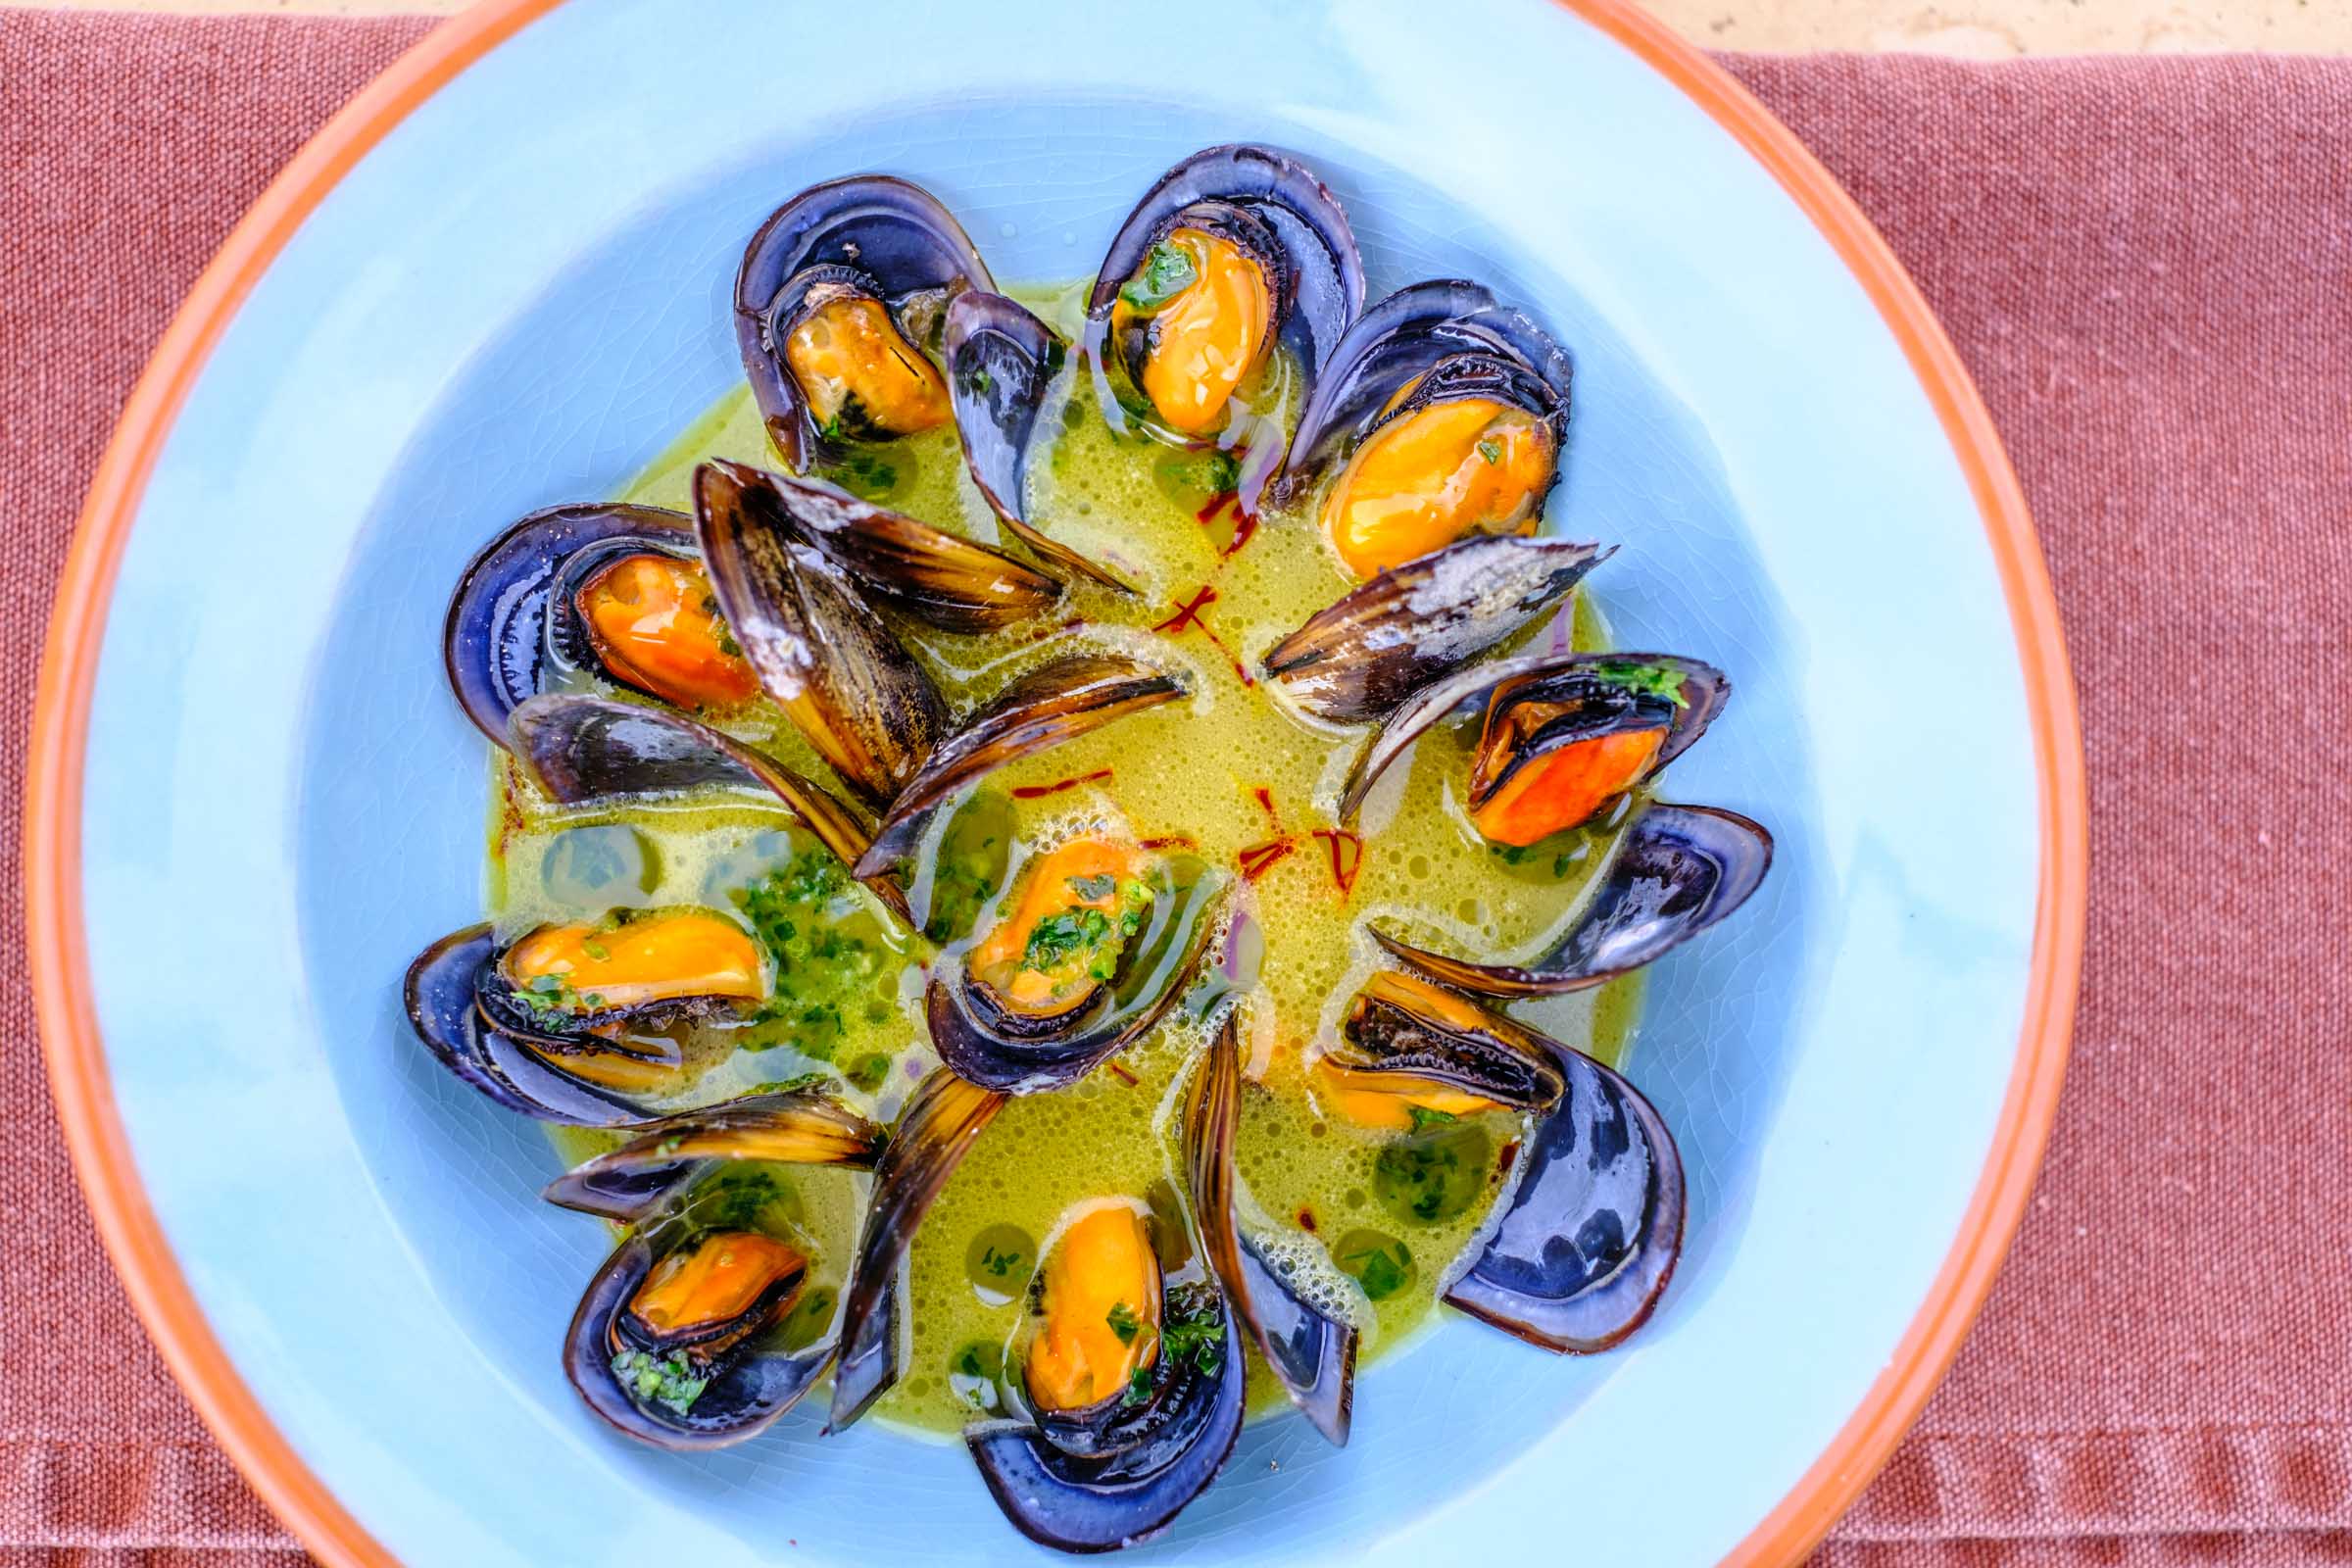 mussels in white wine stock